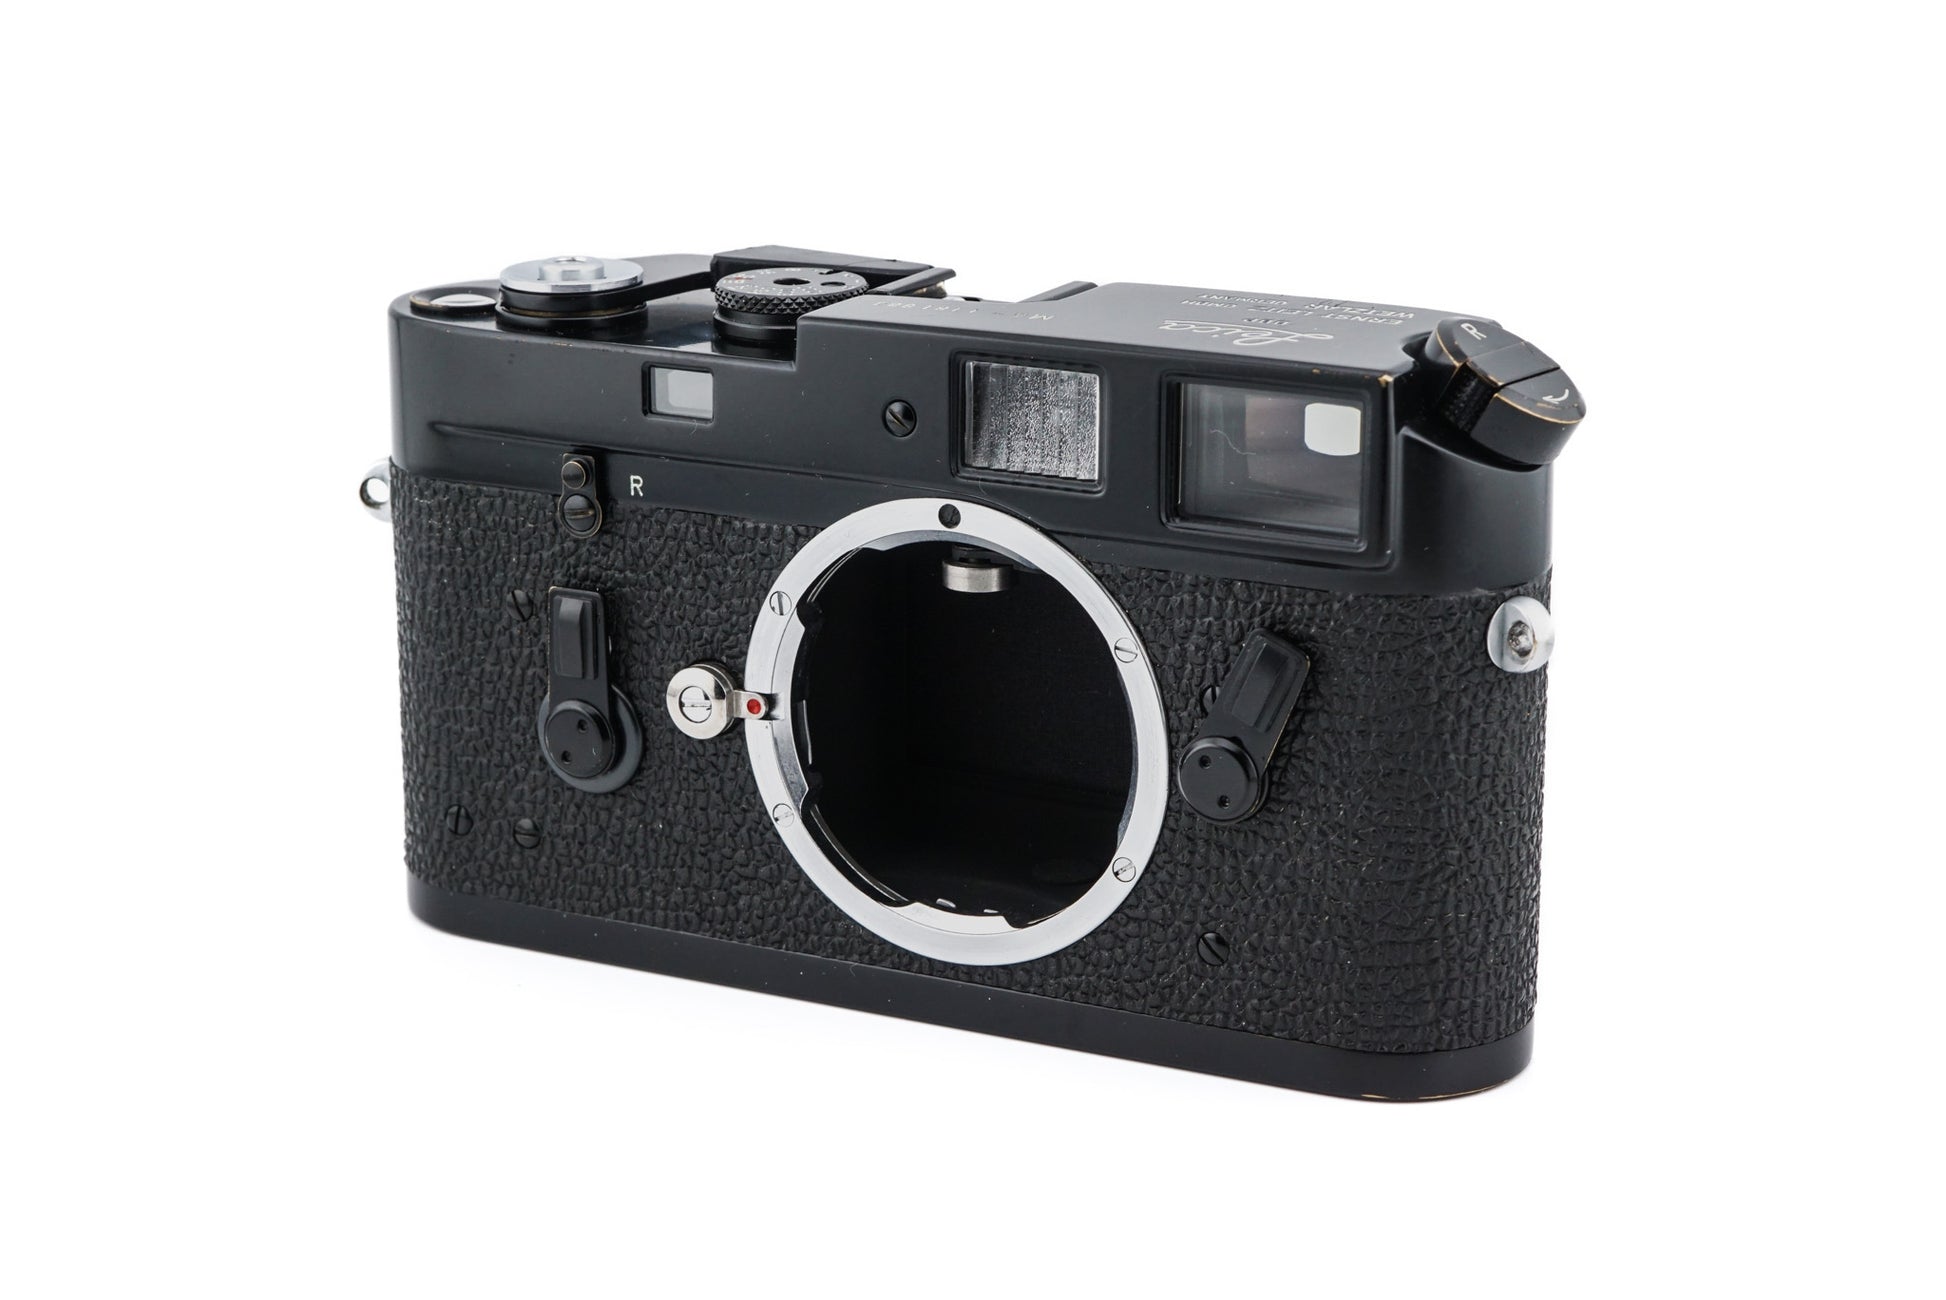 Angled view of a first batch Leica M4 black paint from 1967 showing lens mount, viewfinder, and slight brassing on rewind crank